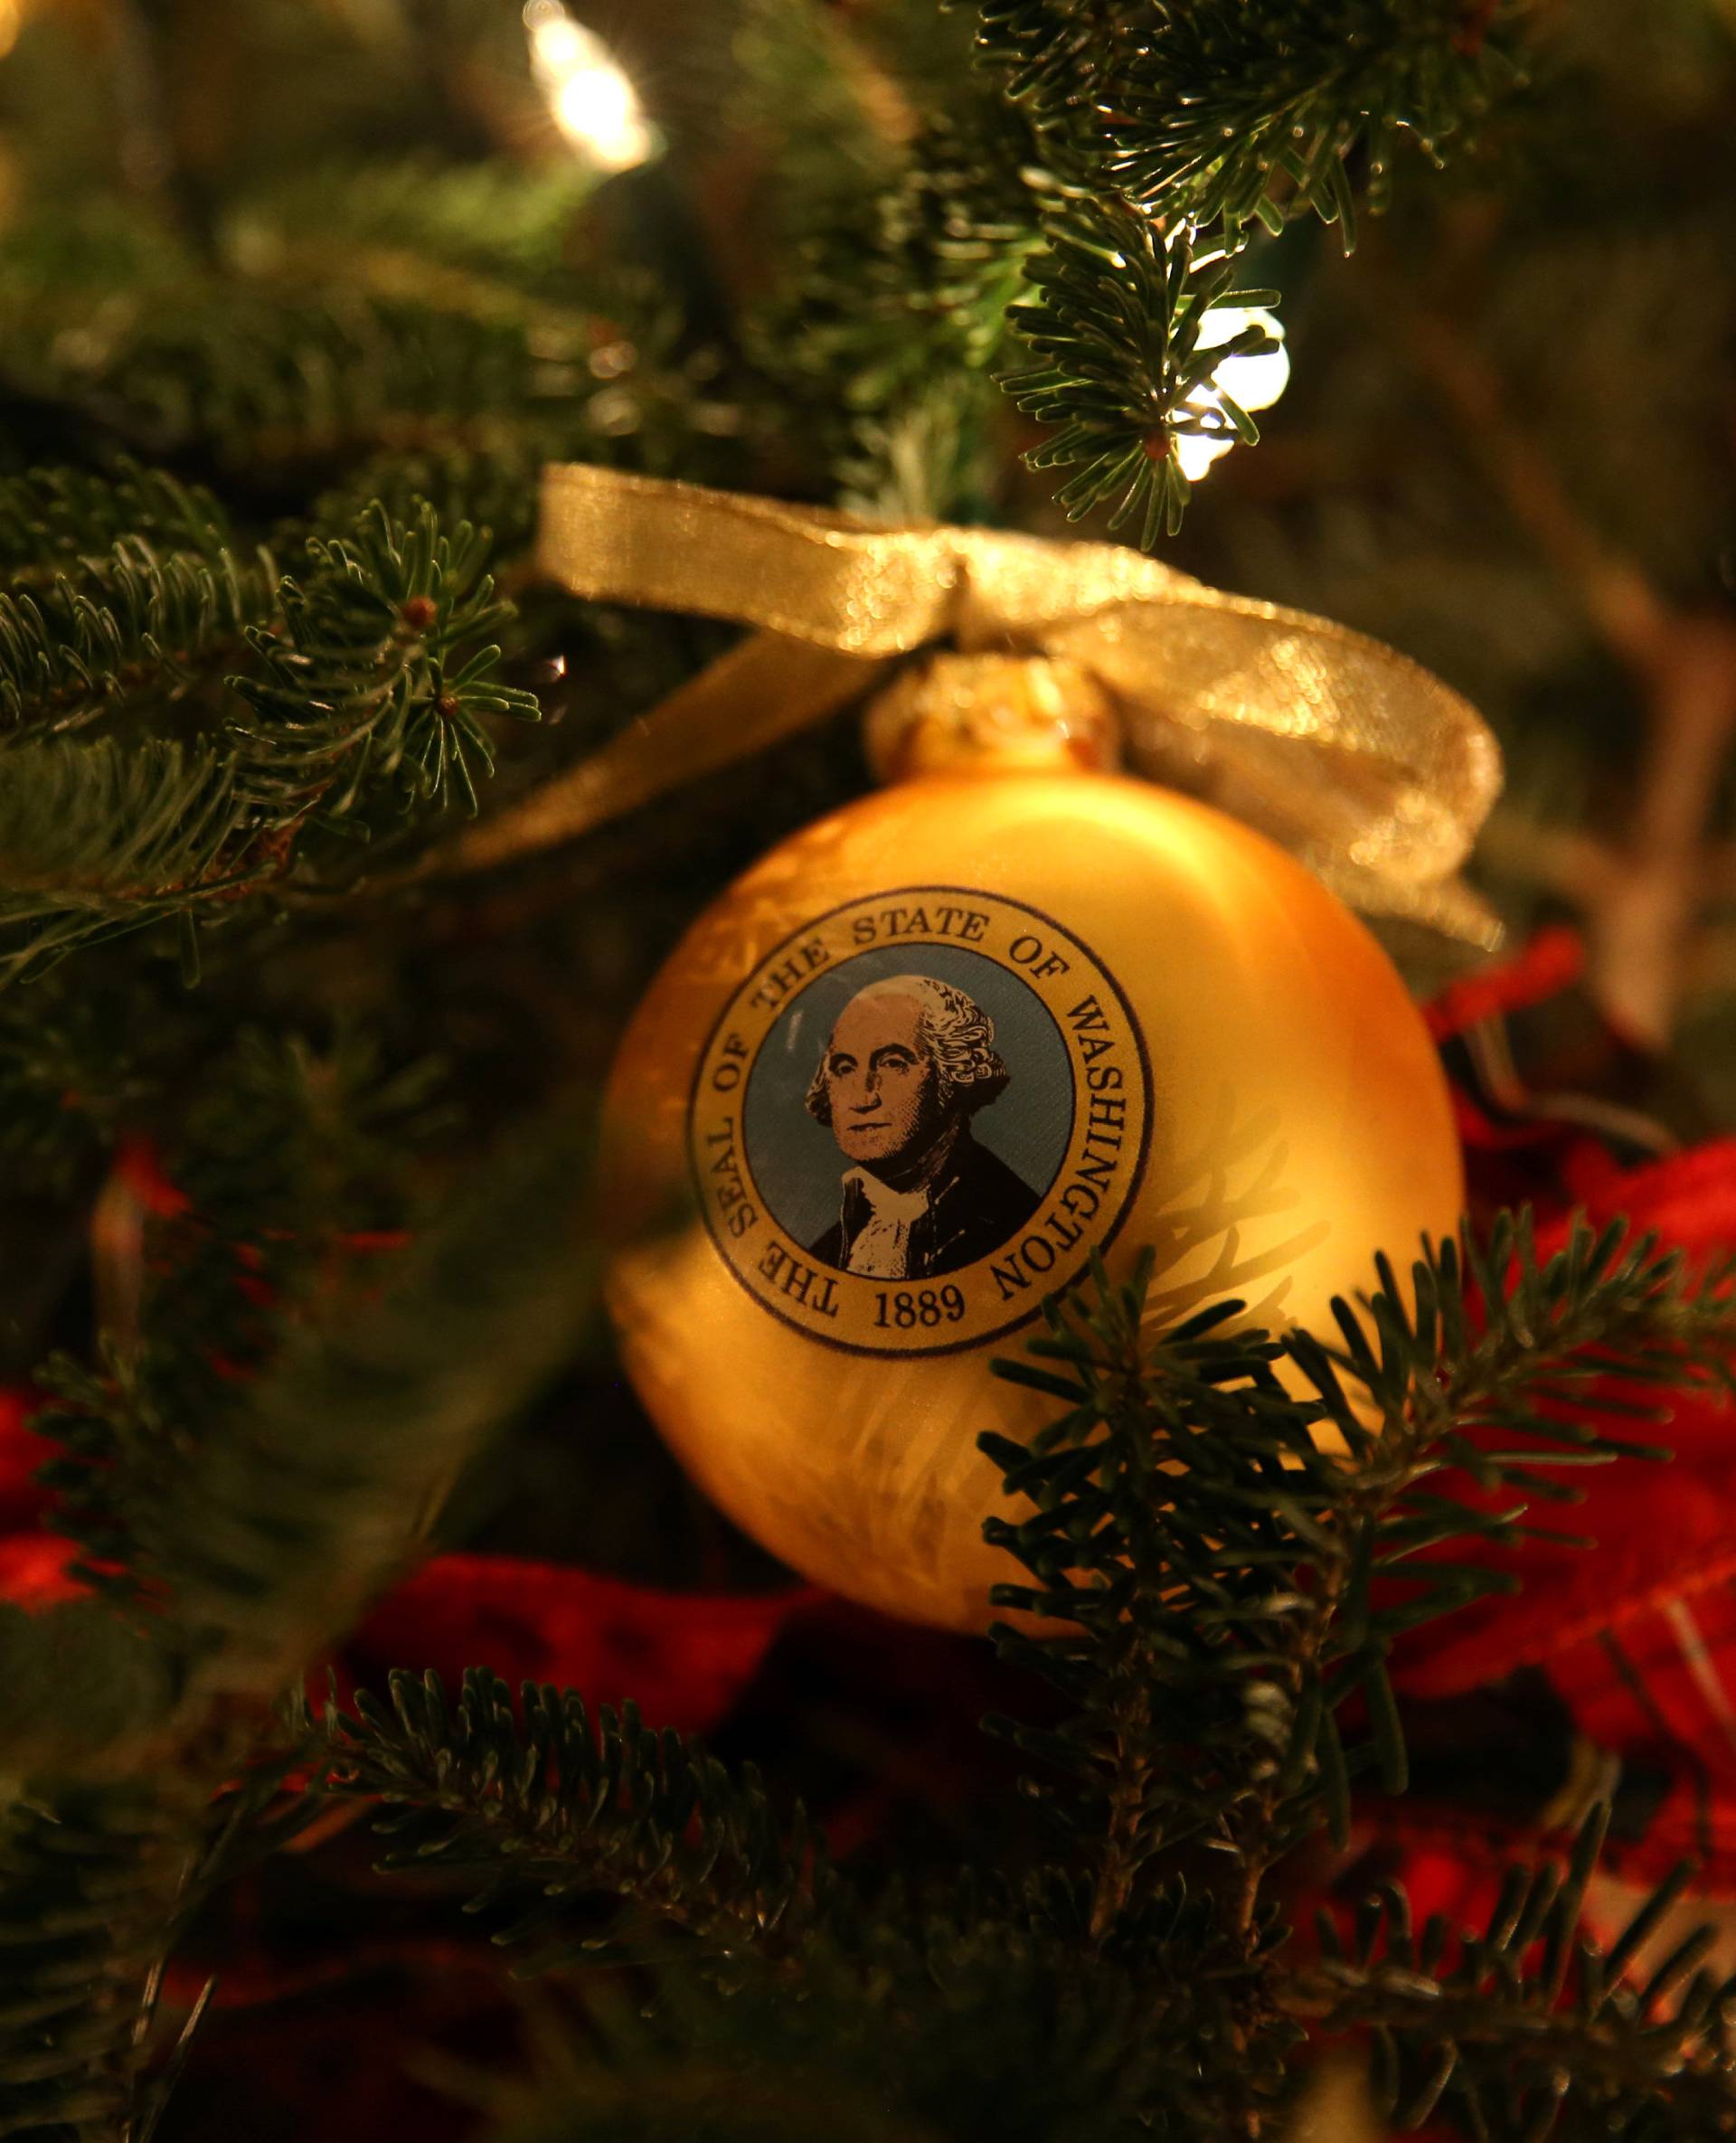 Christmas Press Preview at the White House in Washington